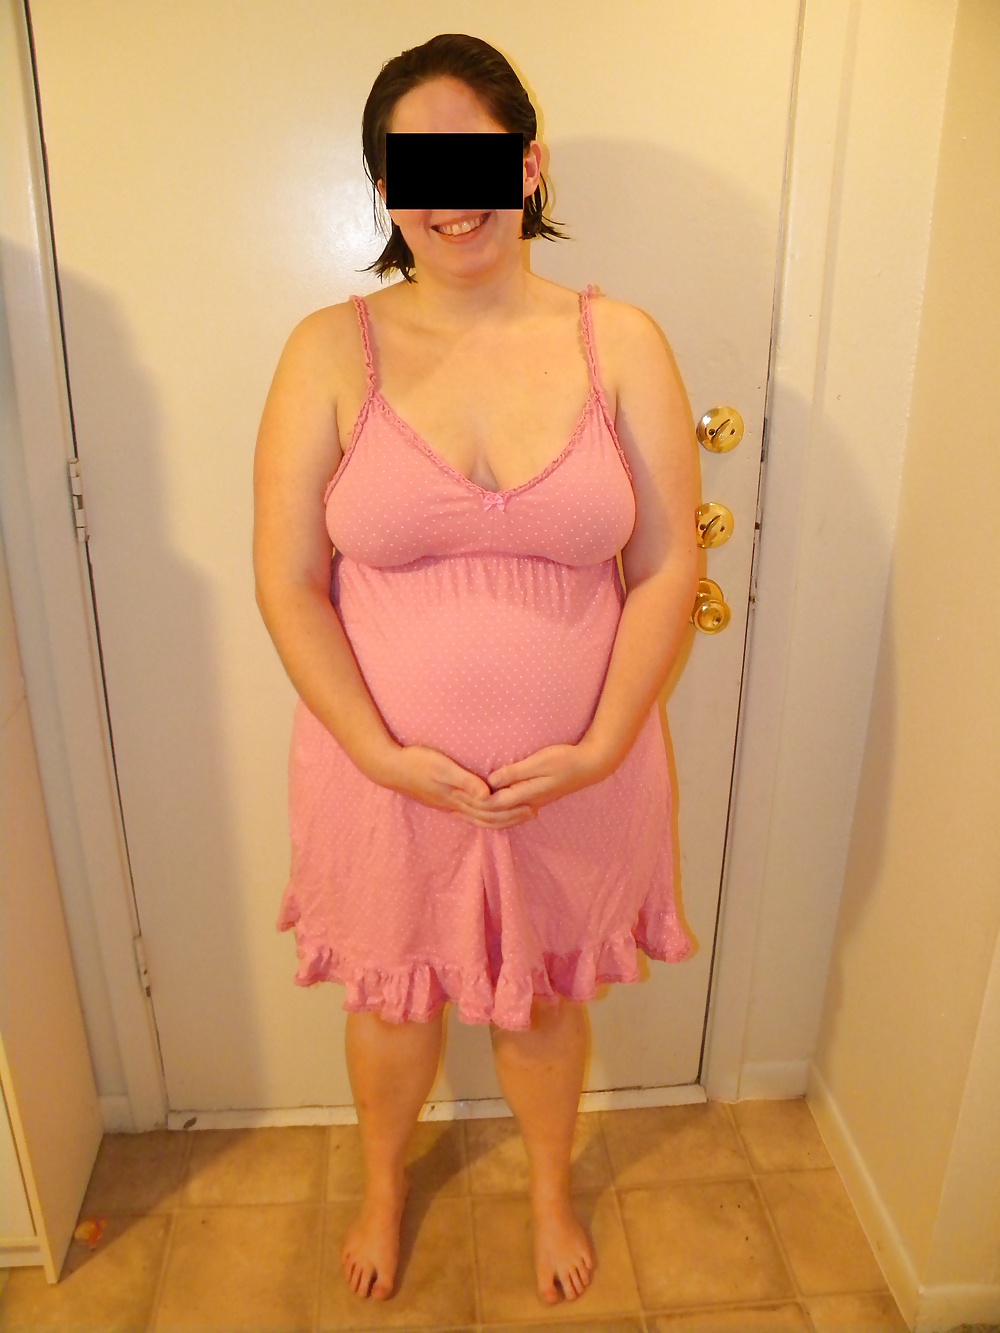 Pregnant Wife in Pink Nightgown #26806184